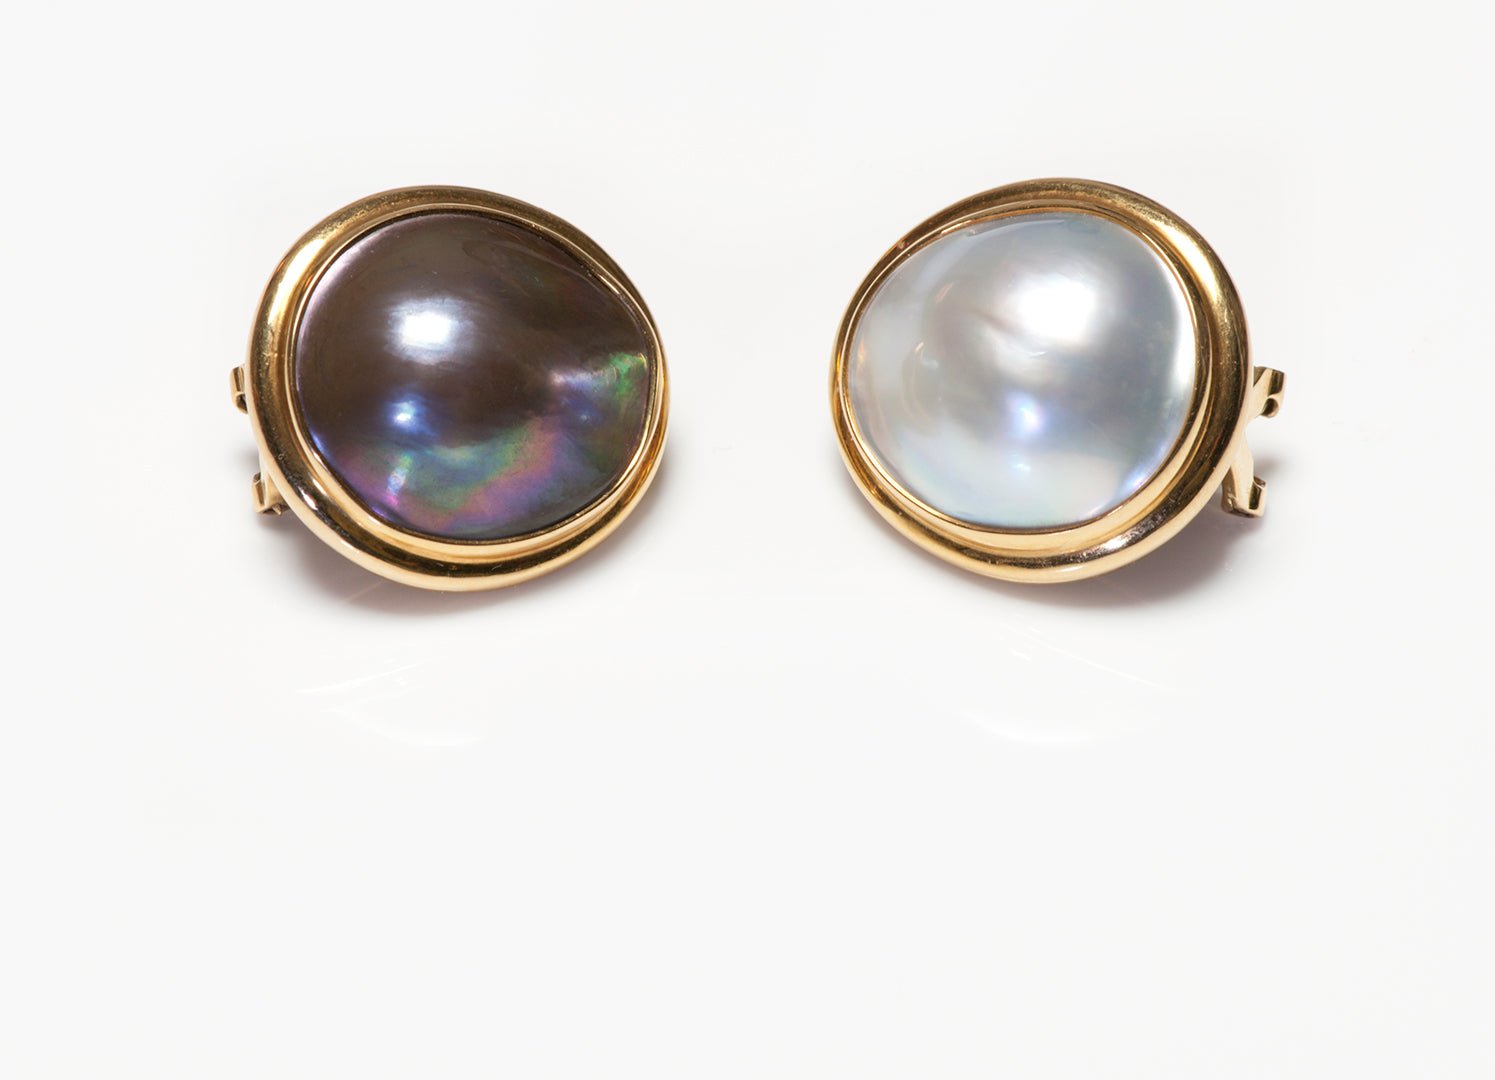 Vintage 18K Gold White & Grey Mabe Pearl Earrings